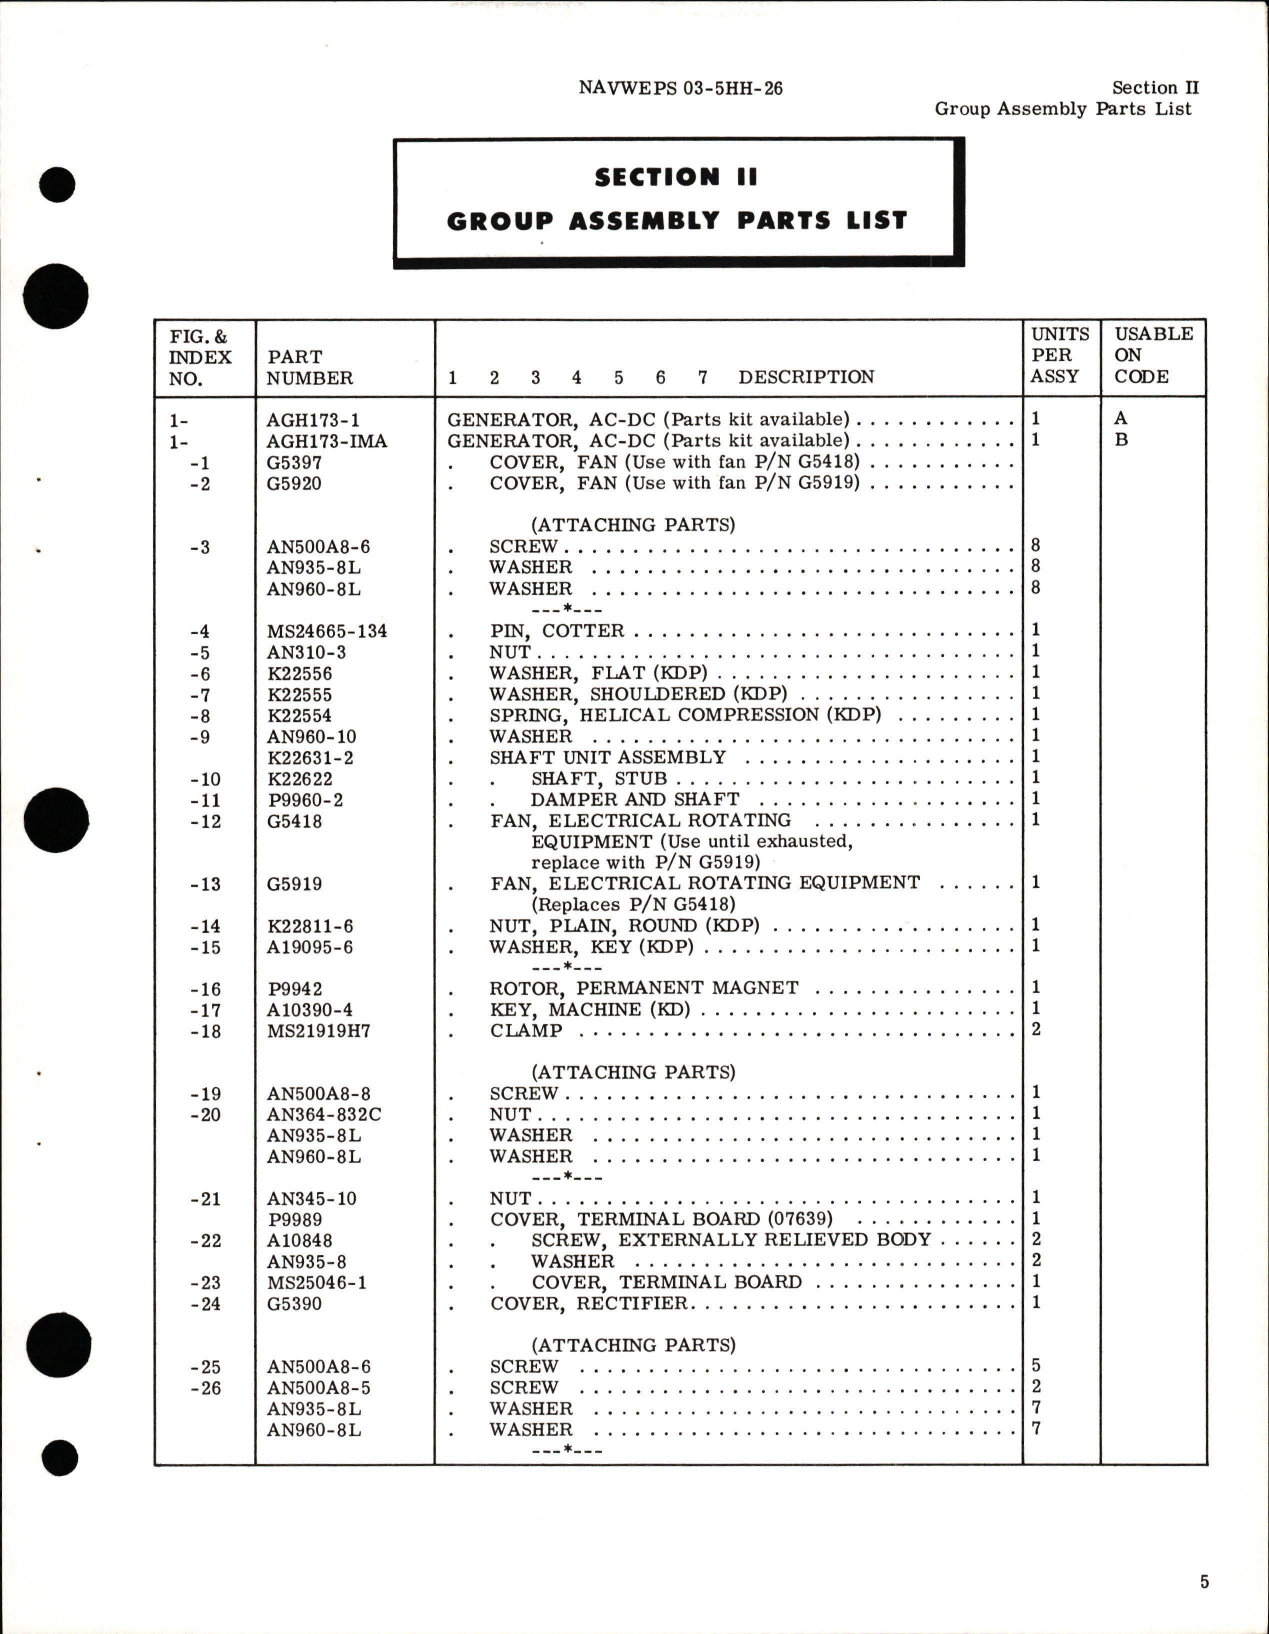 Sample page 7 from AirCorps Library document: Illustrated Parts Breakdown for AC-DC Generator - Parts AGH173-1, AGH173-1MA and AGH173-2 